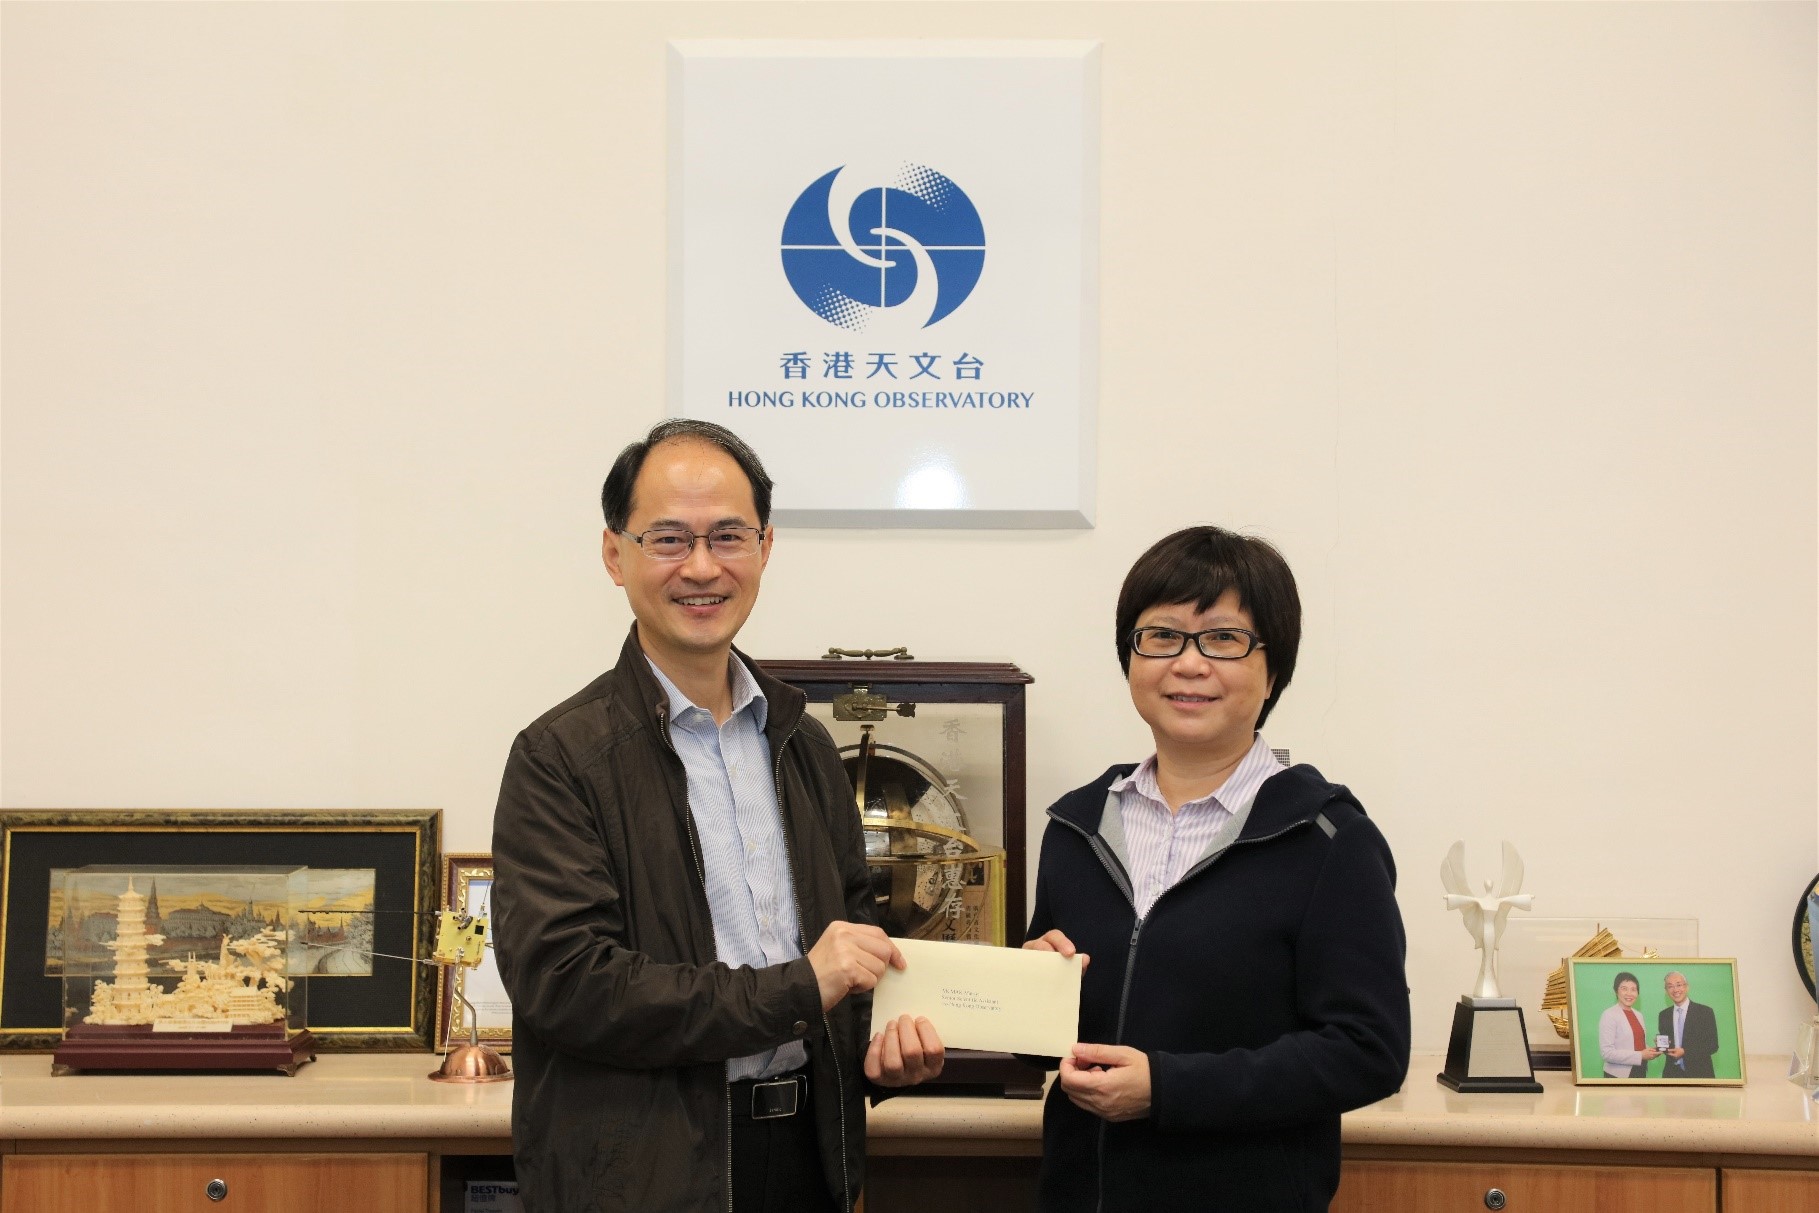 Ms Mak Man-yi (right) was promoted to Chief Scientific Assistant